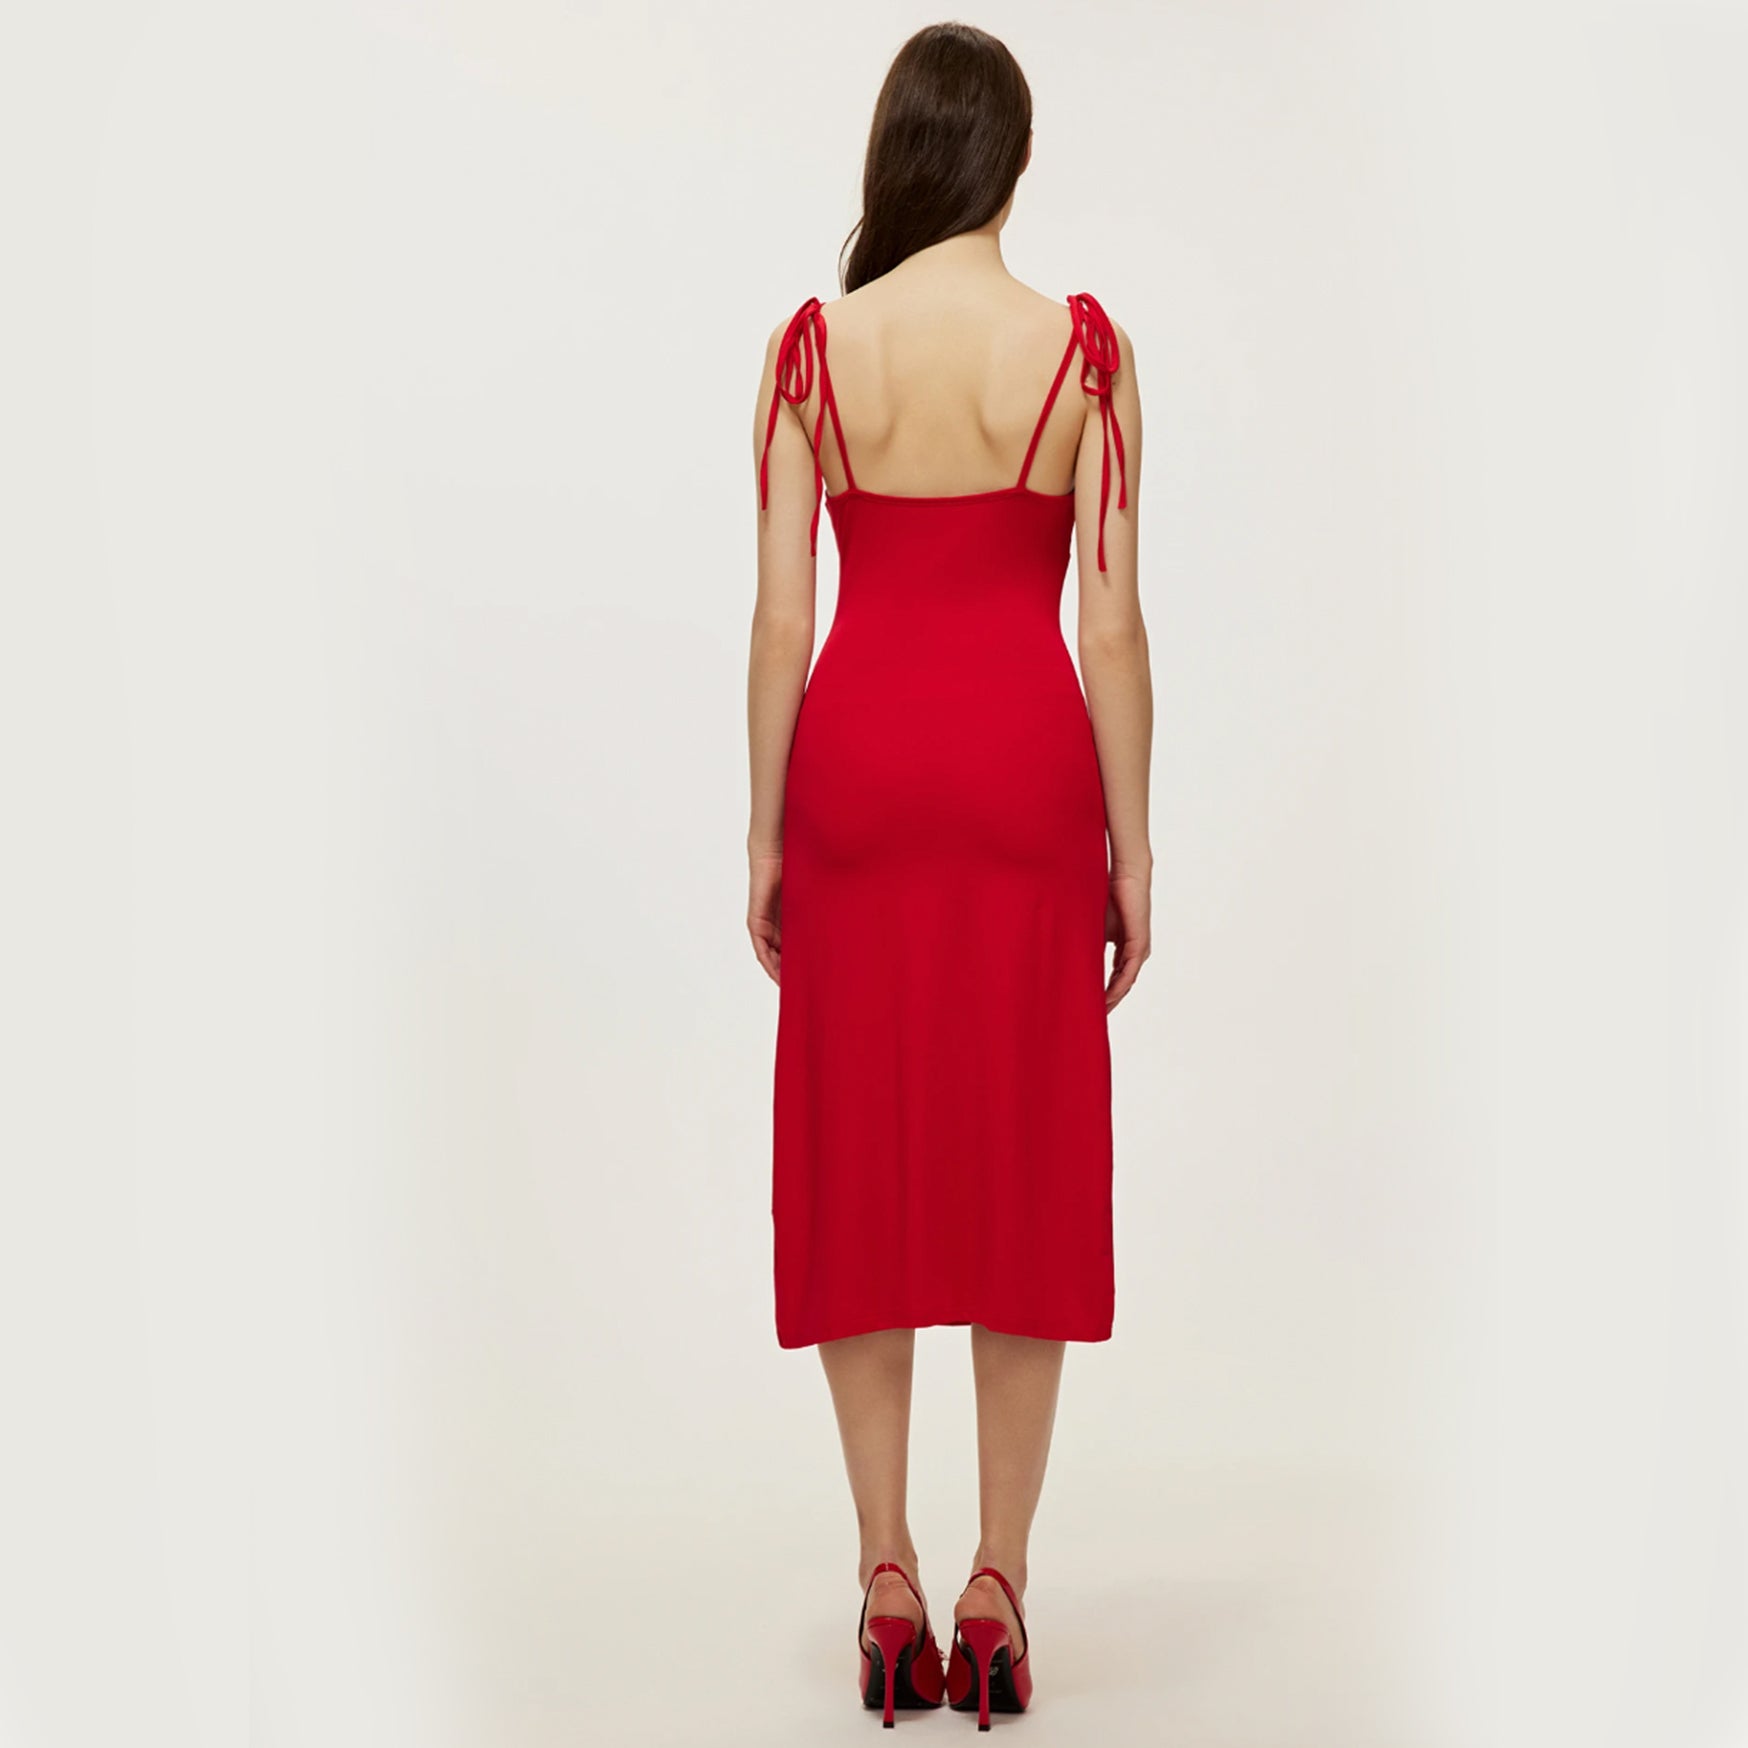 Gathered Tied Strap Midi Dress With Slit - Red L